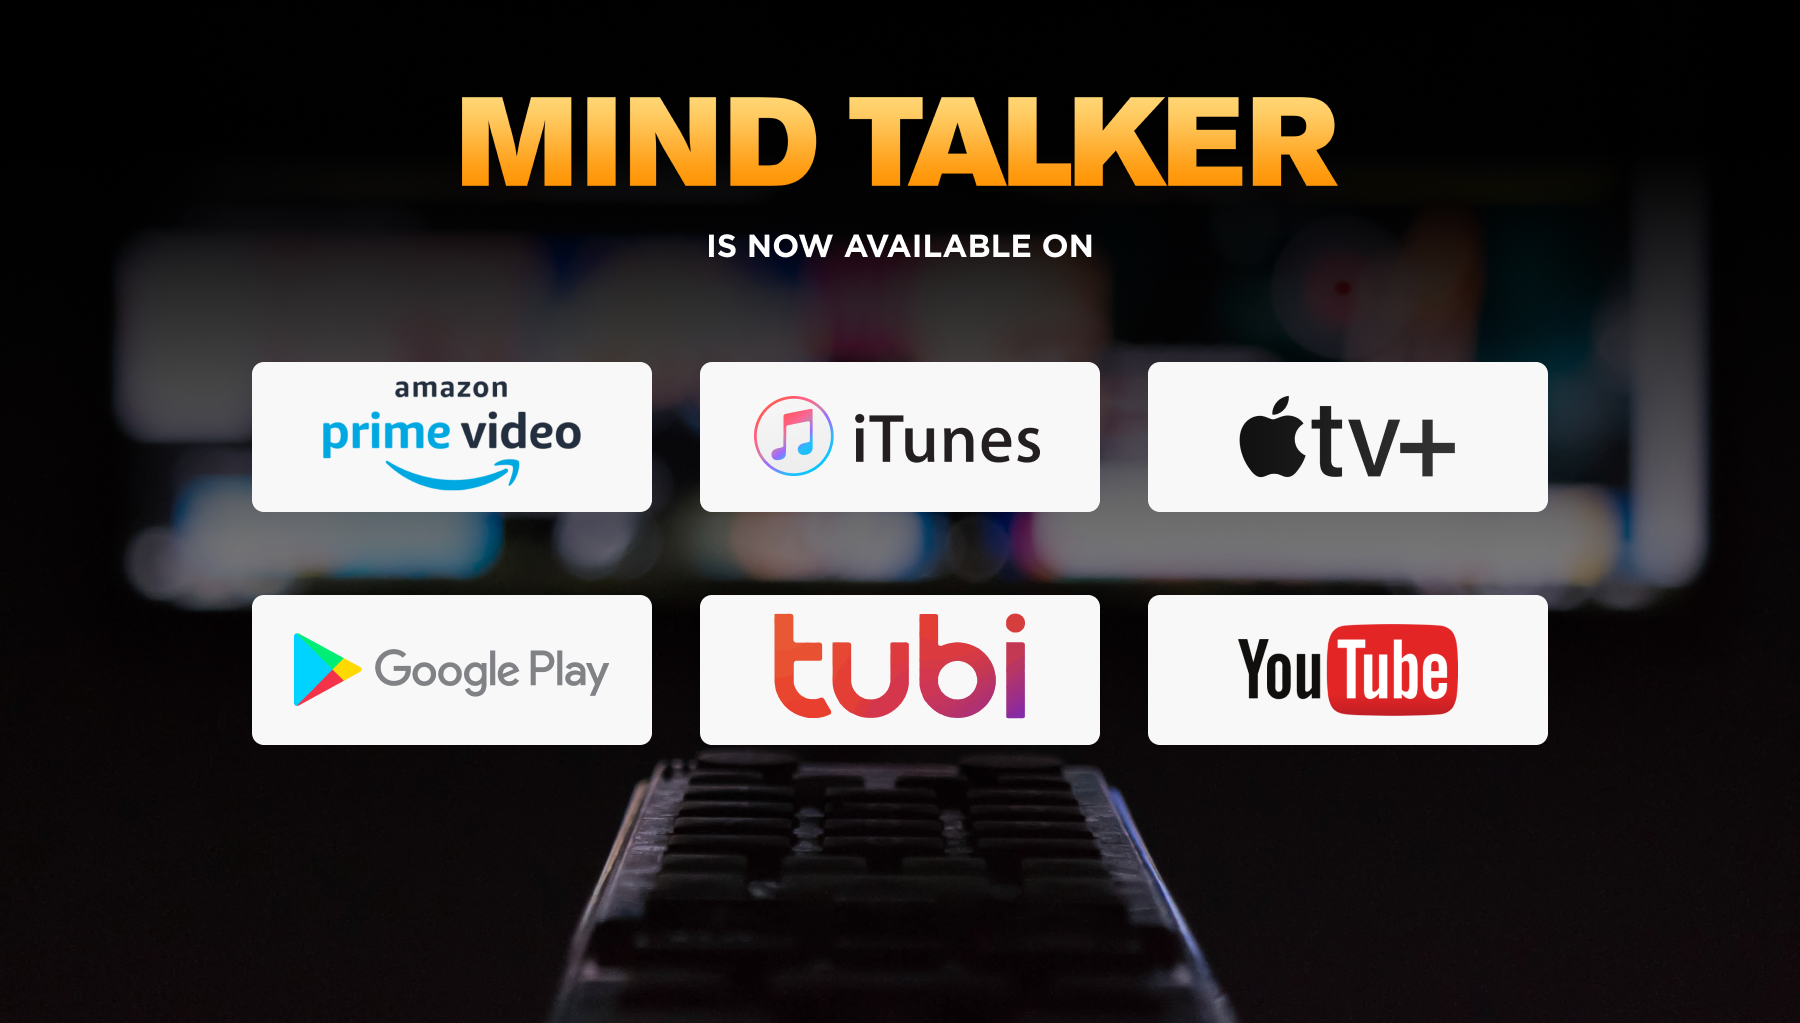 Mindtalk is now available on different streaming platform